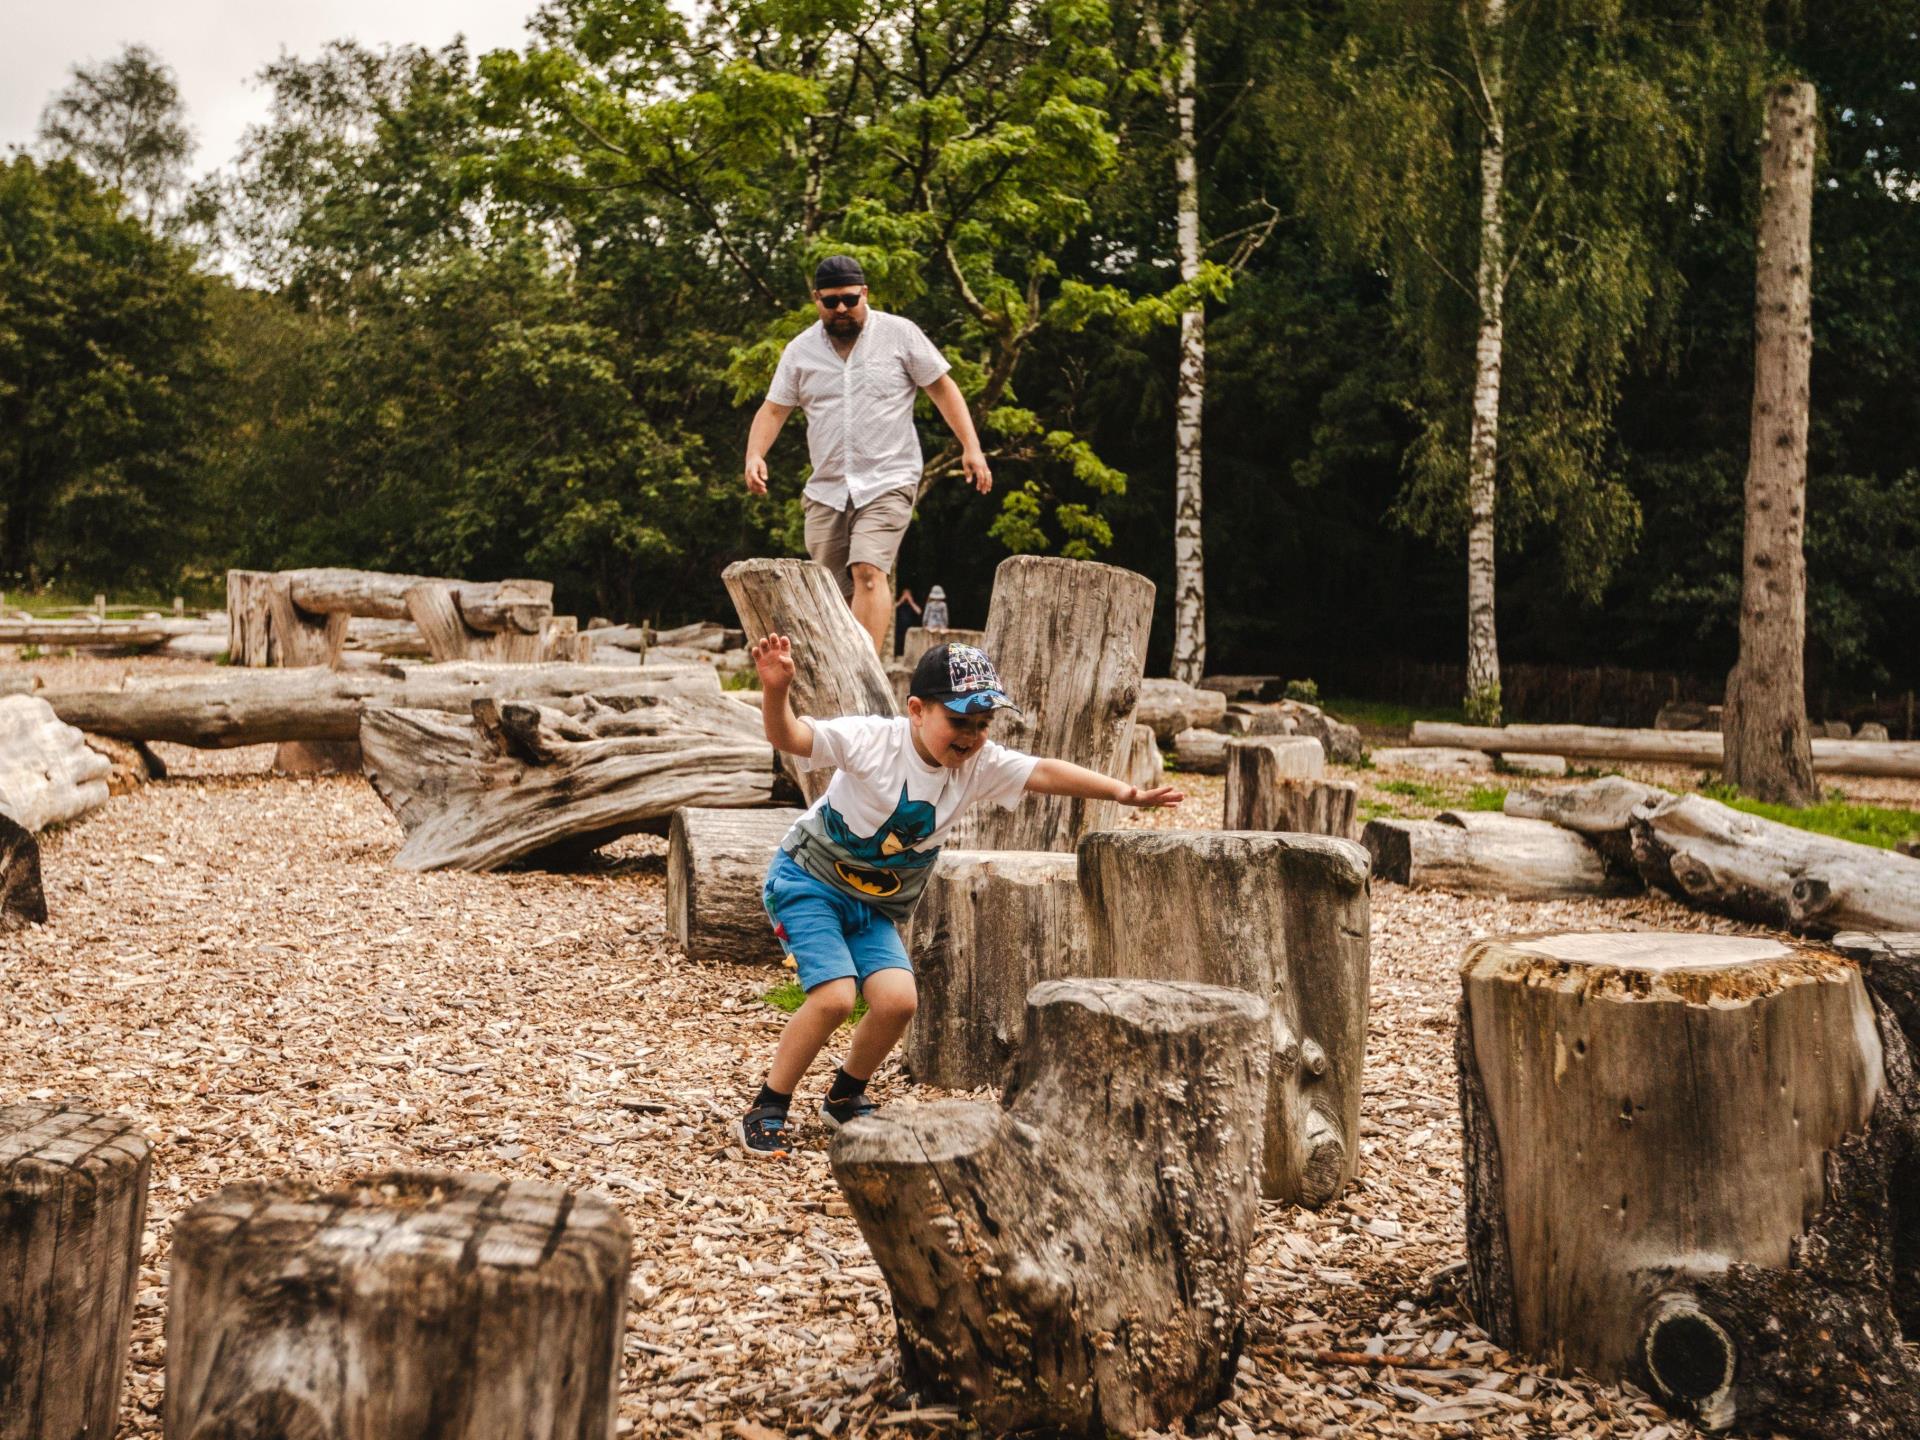 The Log Stack play area at Dyffryn Gardens